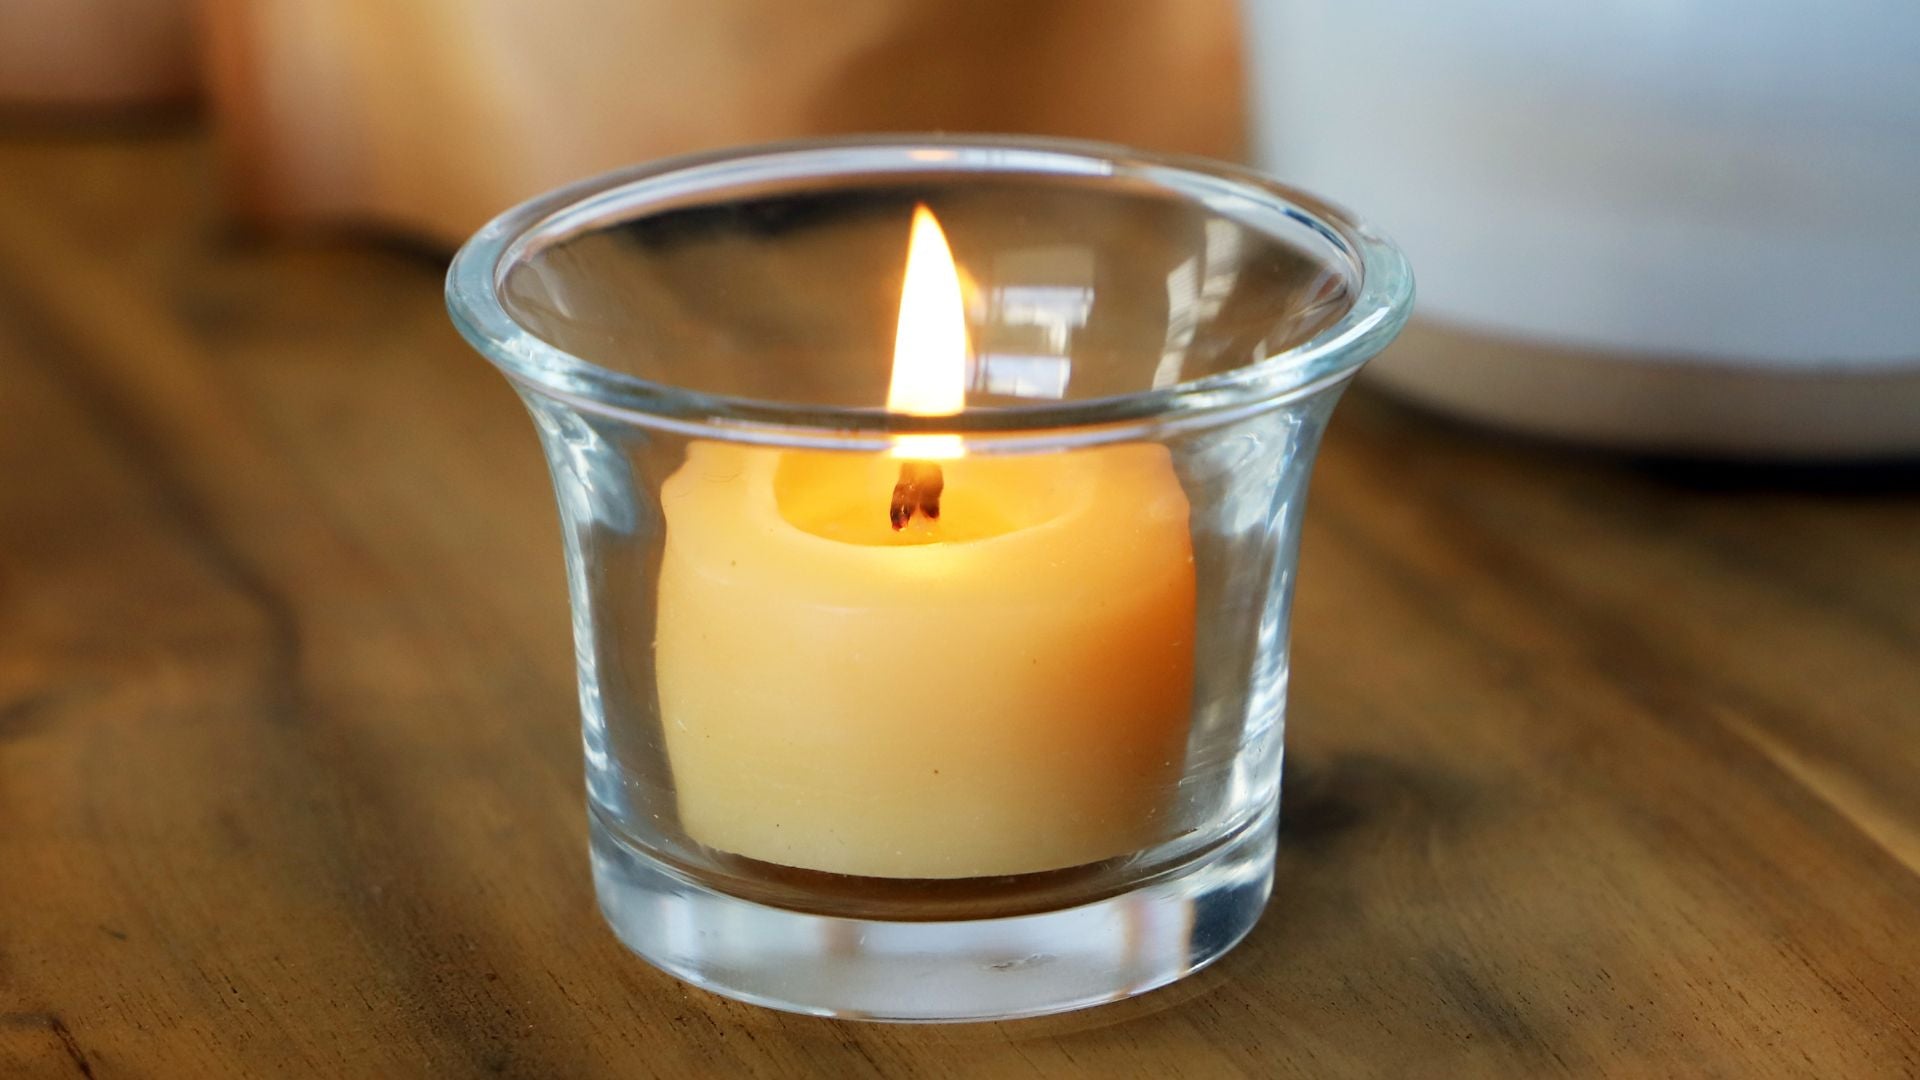 Collombatti Naturals Why beeswax candles are the eco-friendly choice picture of a single beeswax tea light burning in a glass candle holder